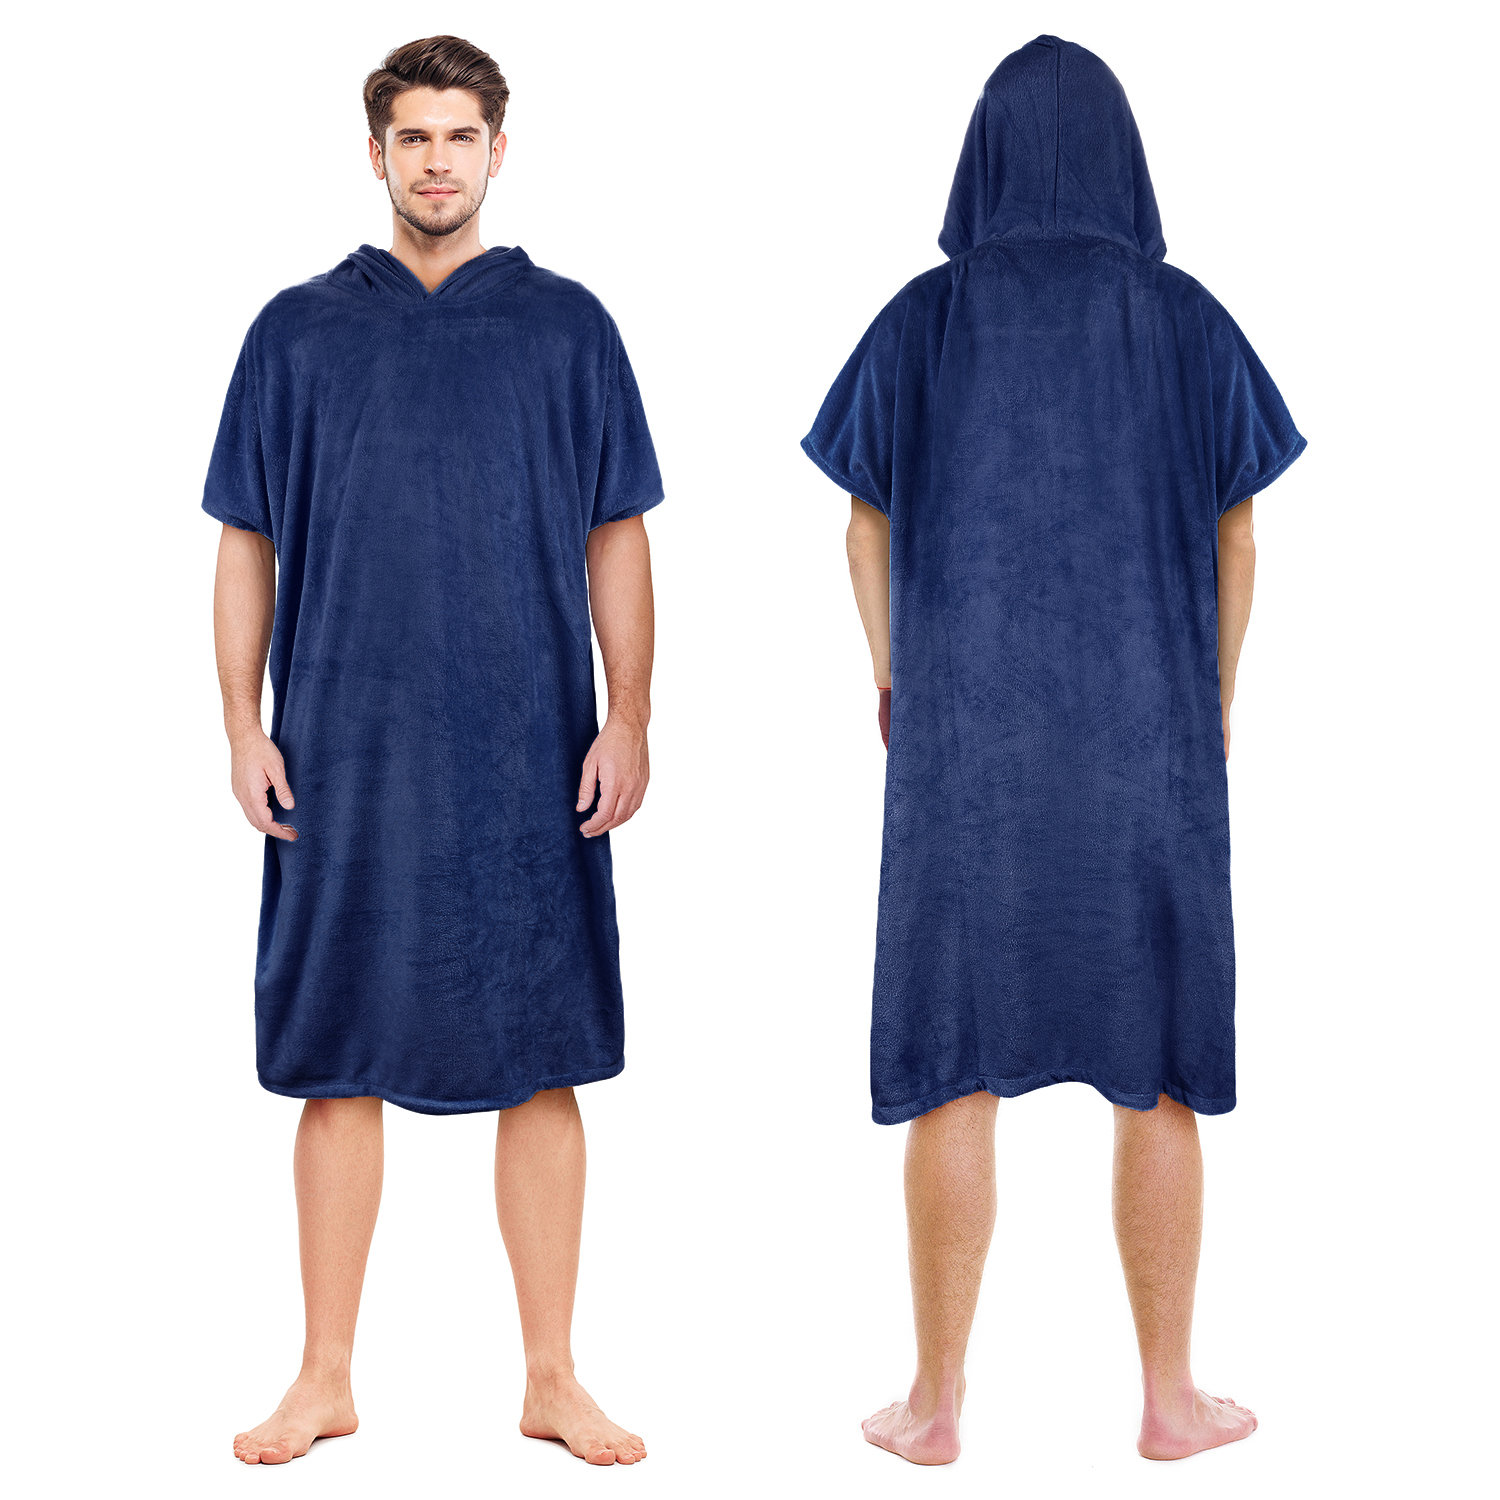 Poncho Towel Changing Robes, Swim and Surf